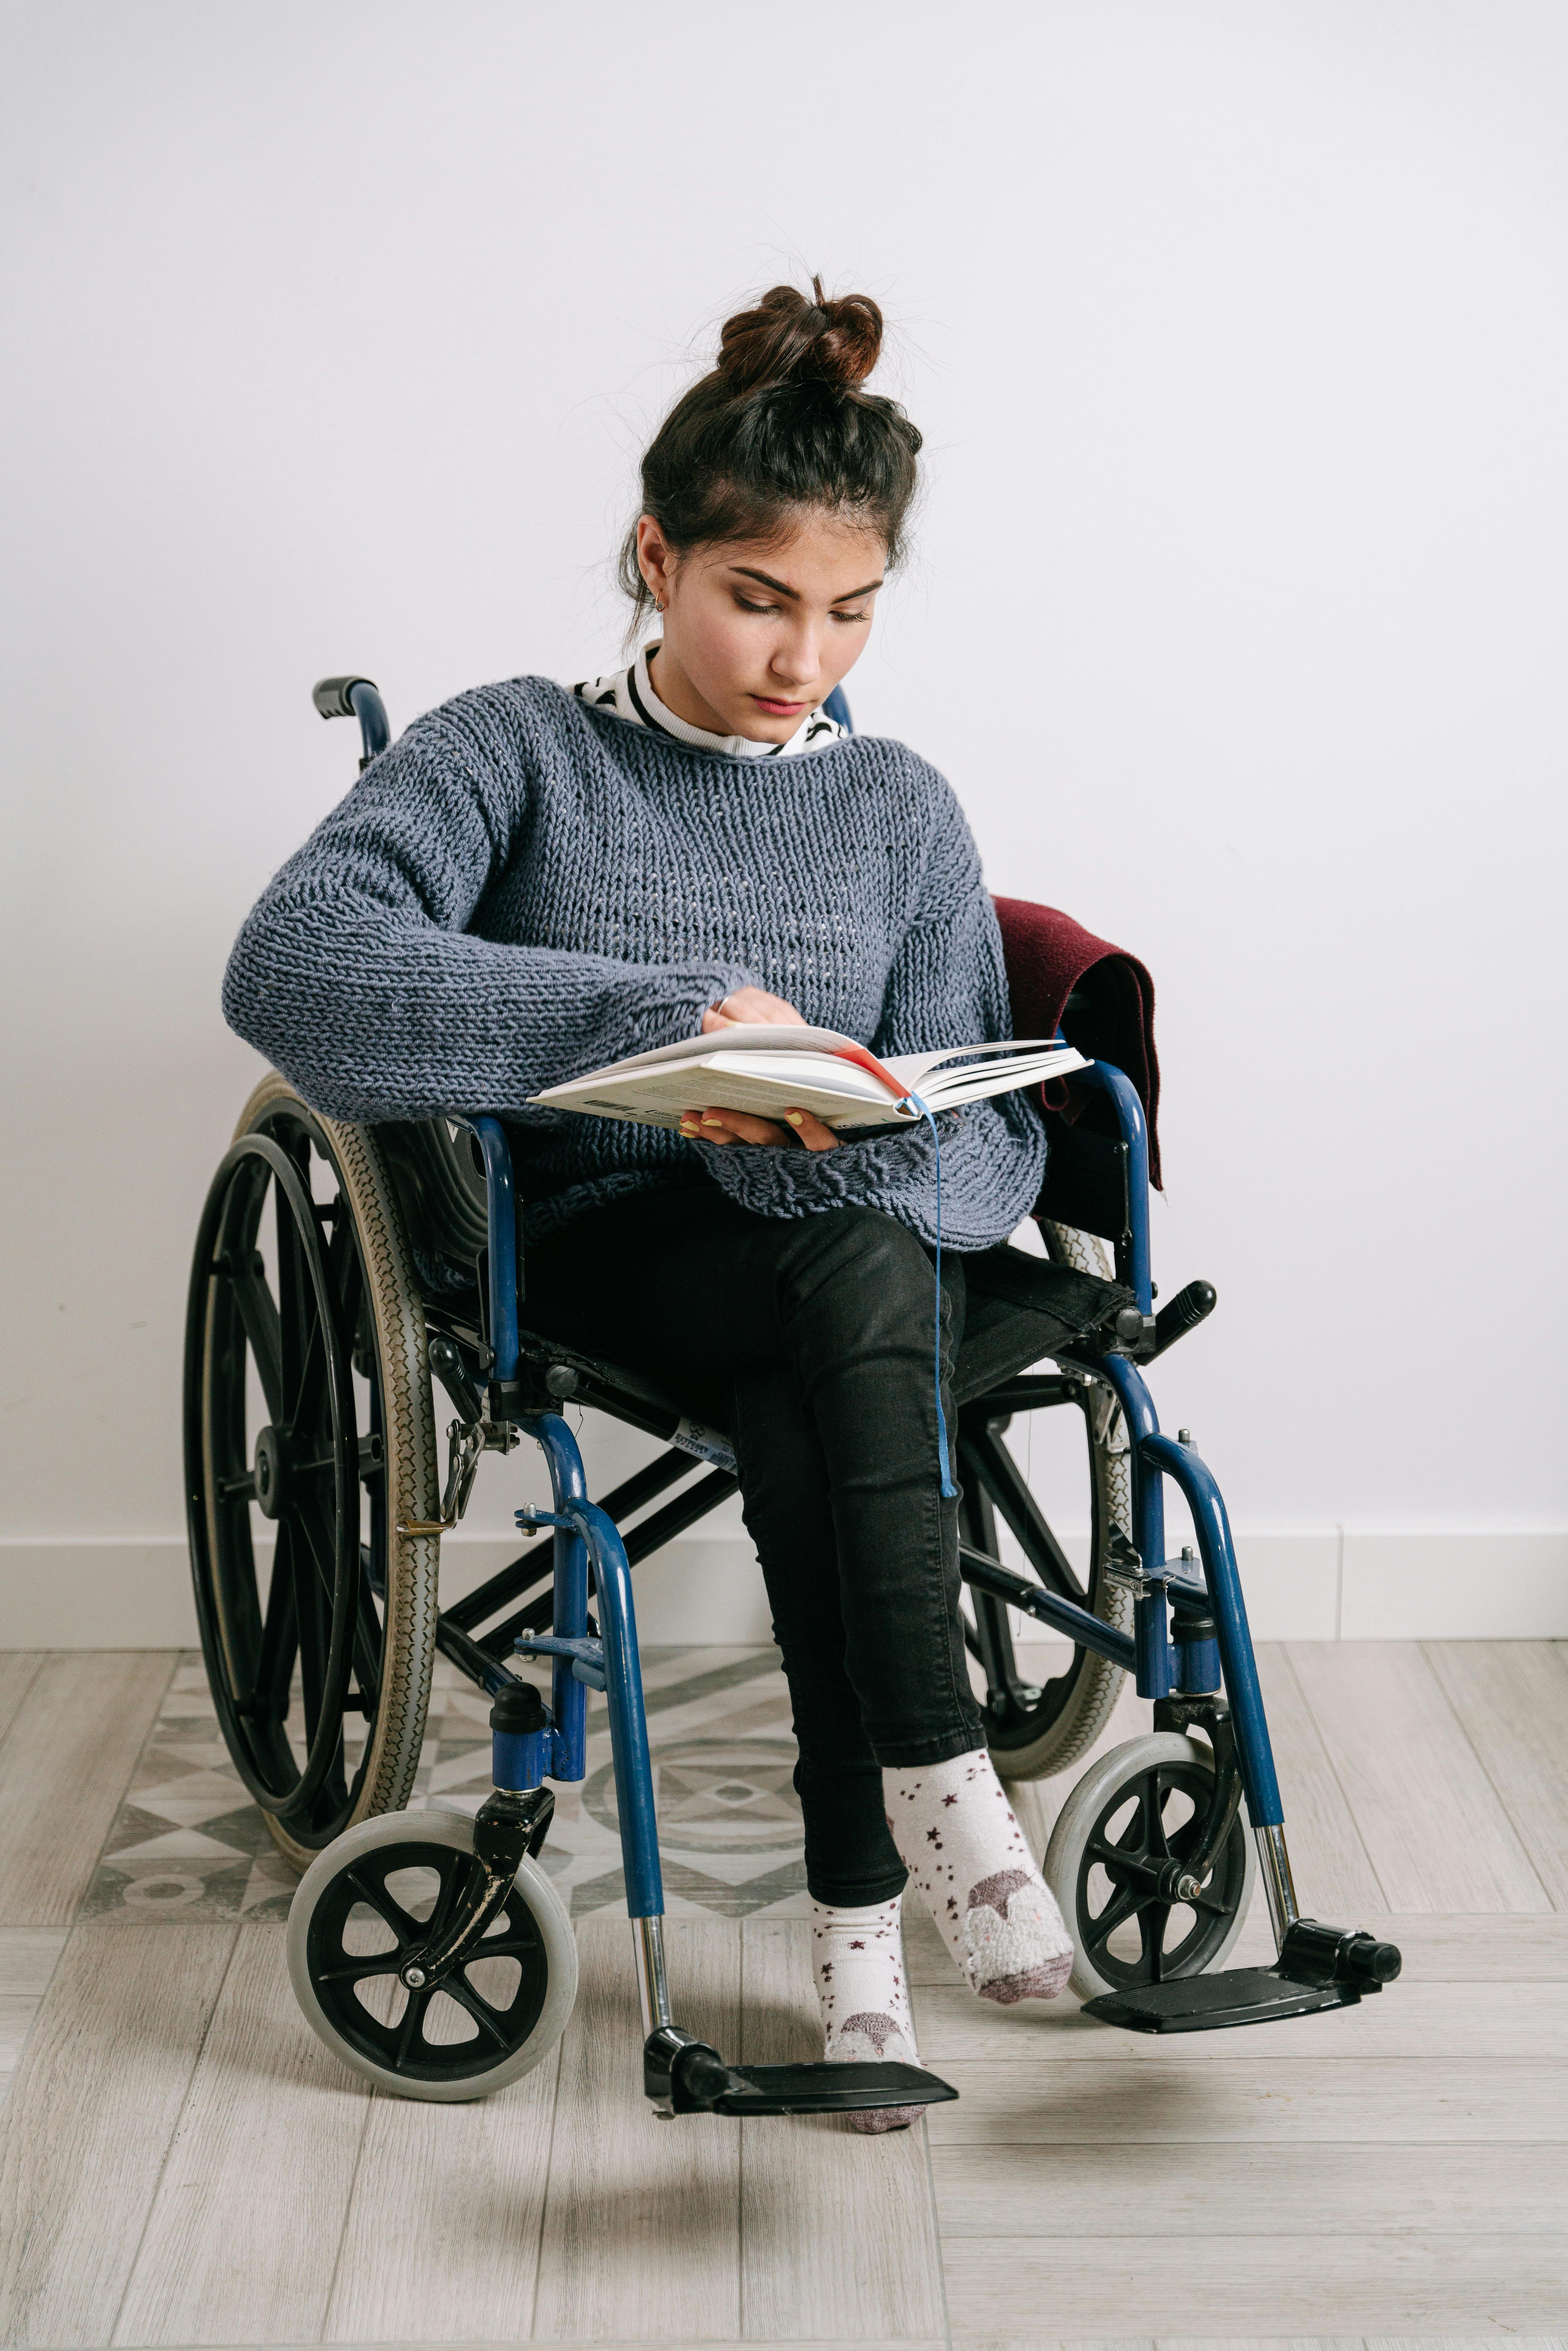 A young woman in a wheelchair reading. For illustration purposes only | Source: Pexels